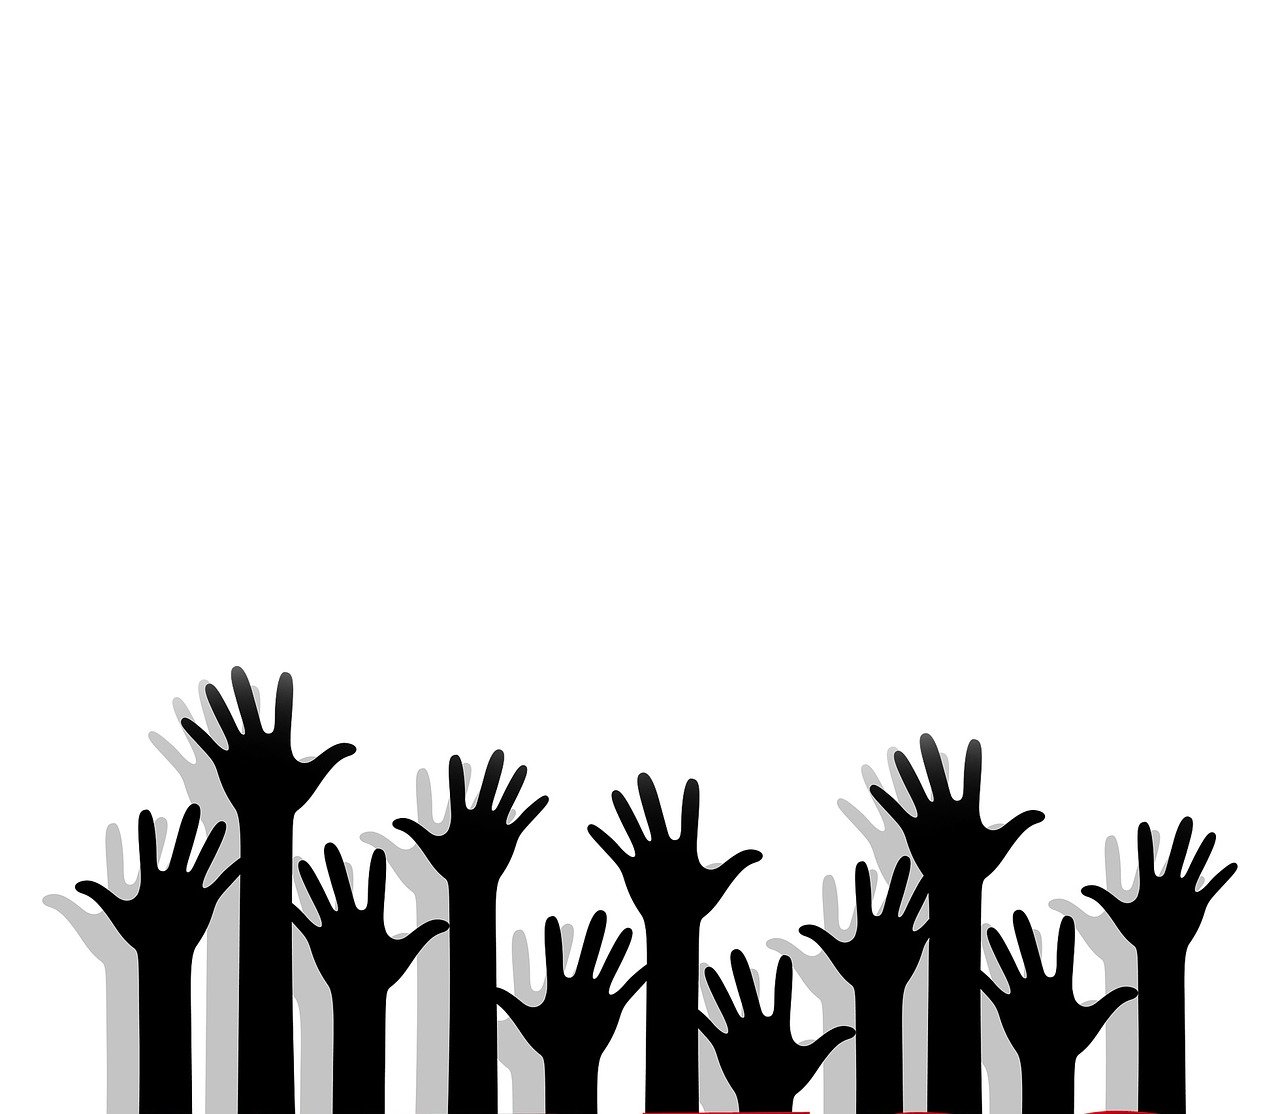 a group of people raising their hands in the air, an illustration of, conceptual art, black hands with black claws, background image, help me, fans hals